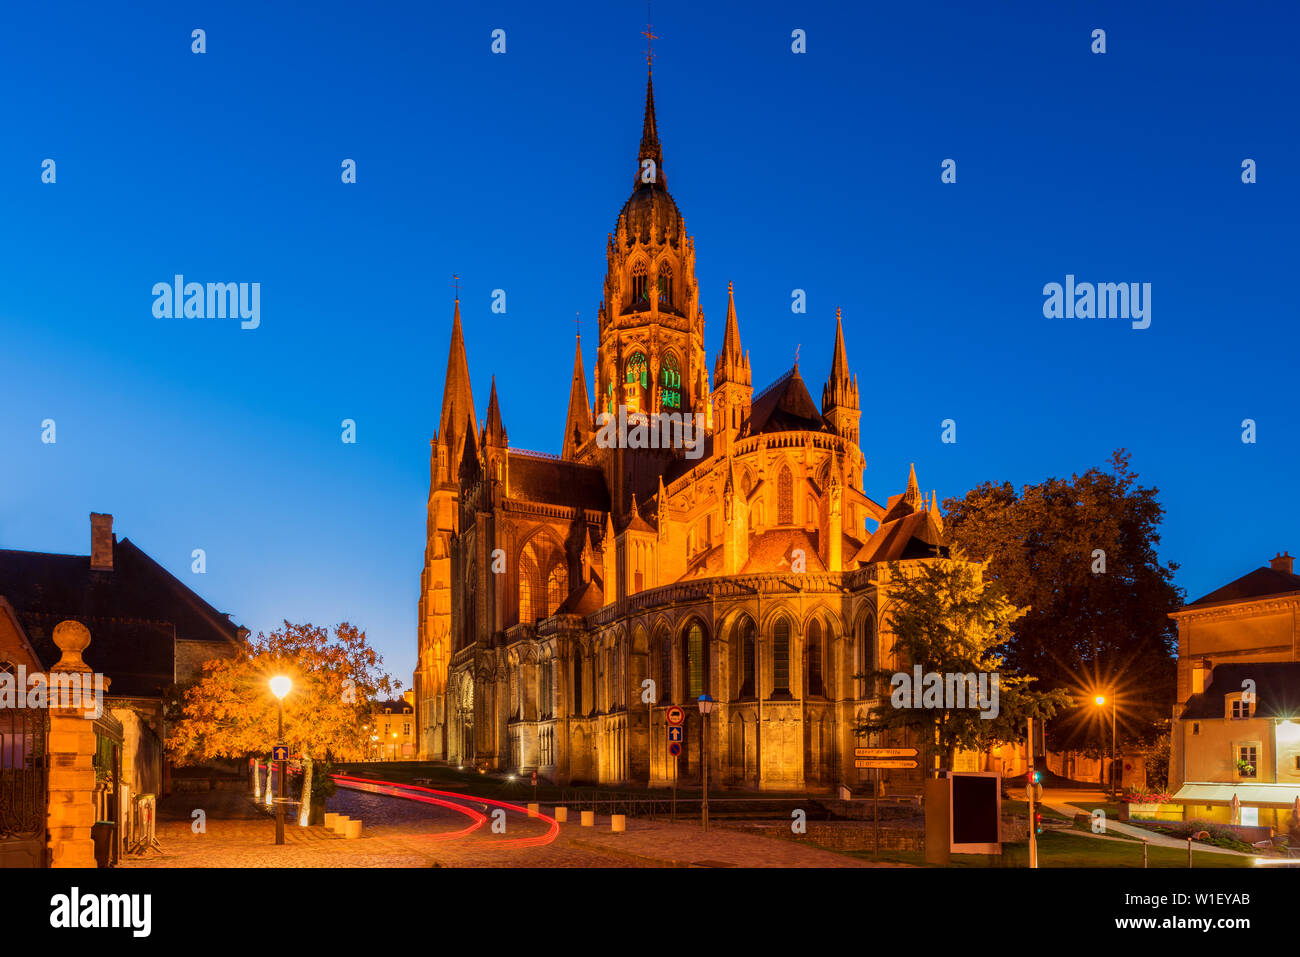 Cathedral of Bayeux Normandy France at Dusk Stock Photo